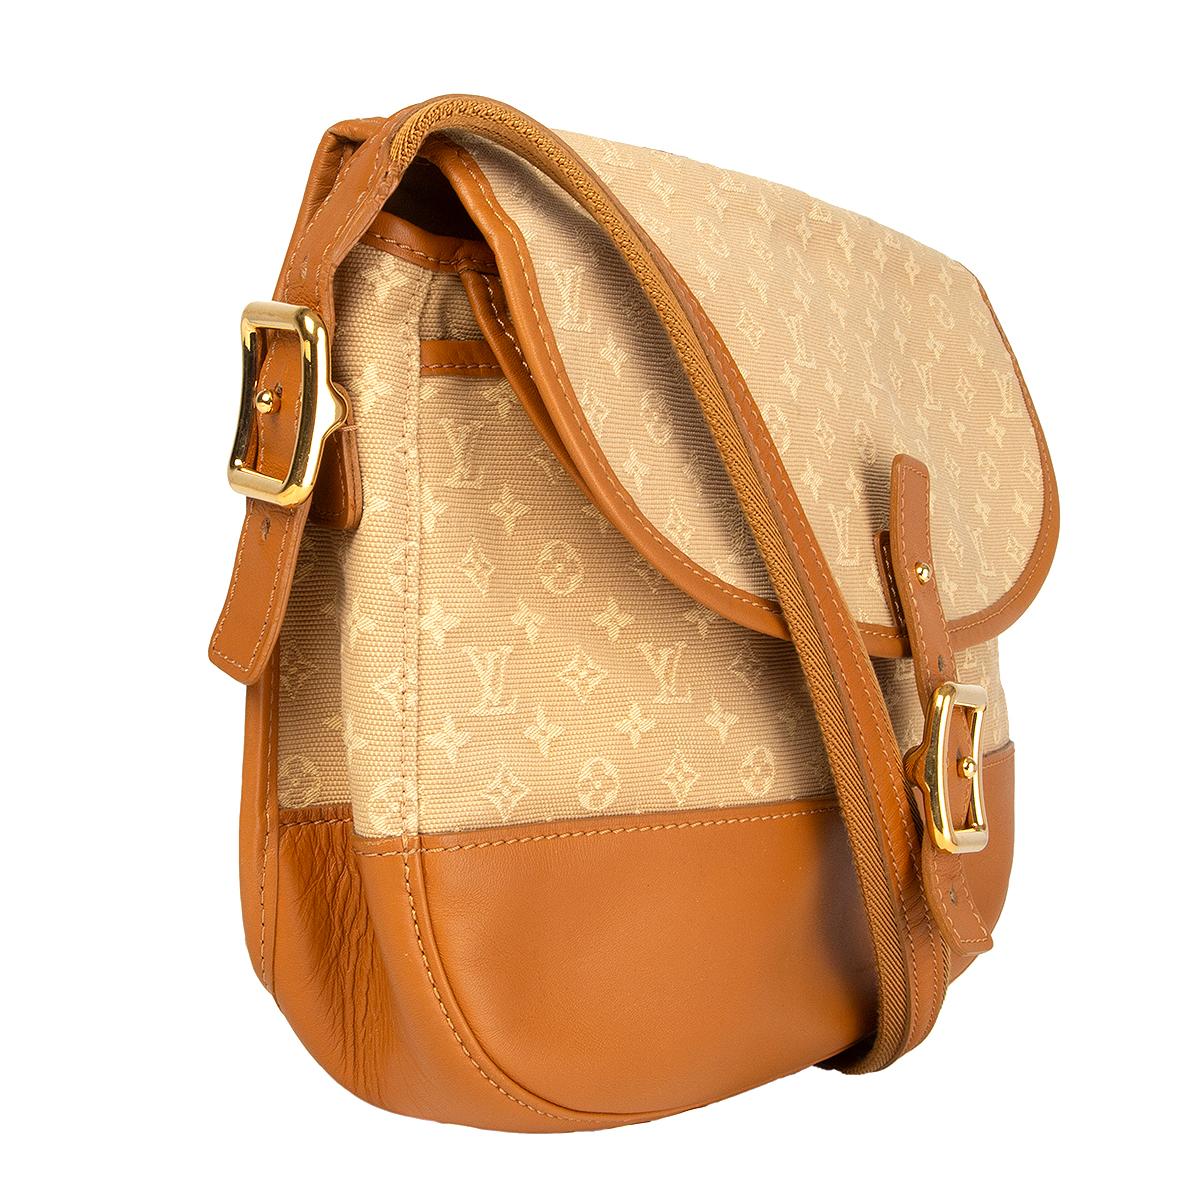 100% authentic Louis Vuitton 'Majorie Shoulder Bag Monogram Mini Lin' in beige Monogram Mini Lin canvas and tan calfskin featuring gold-tone hardware. Opens with a flap and has a another flap pocket under the main flap. Lined in beige canvas with